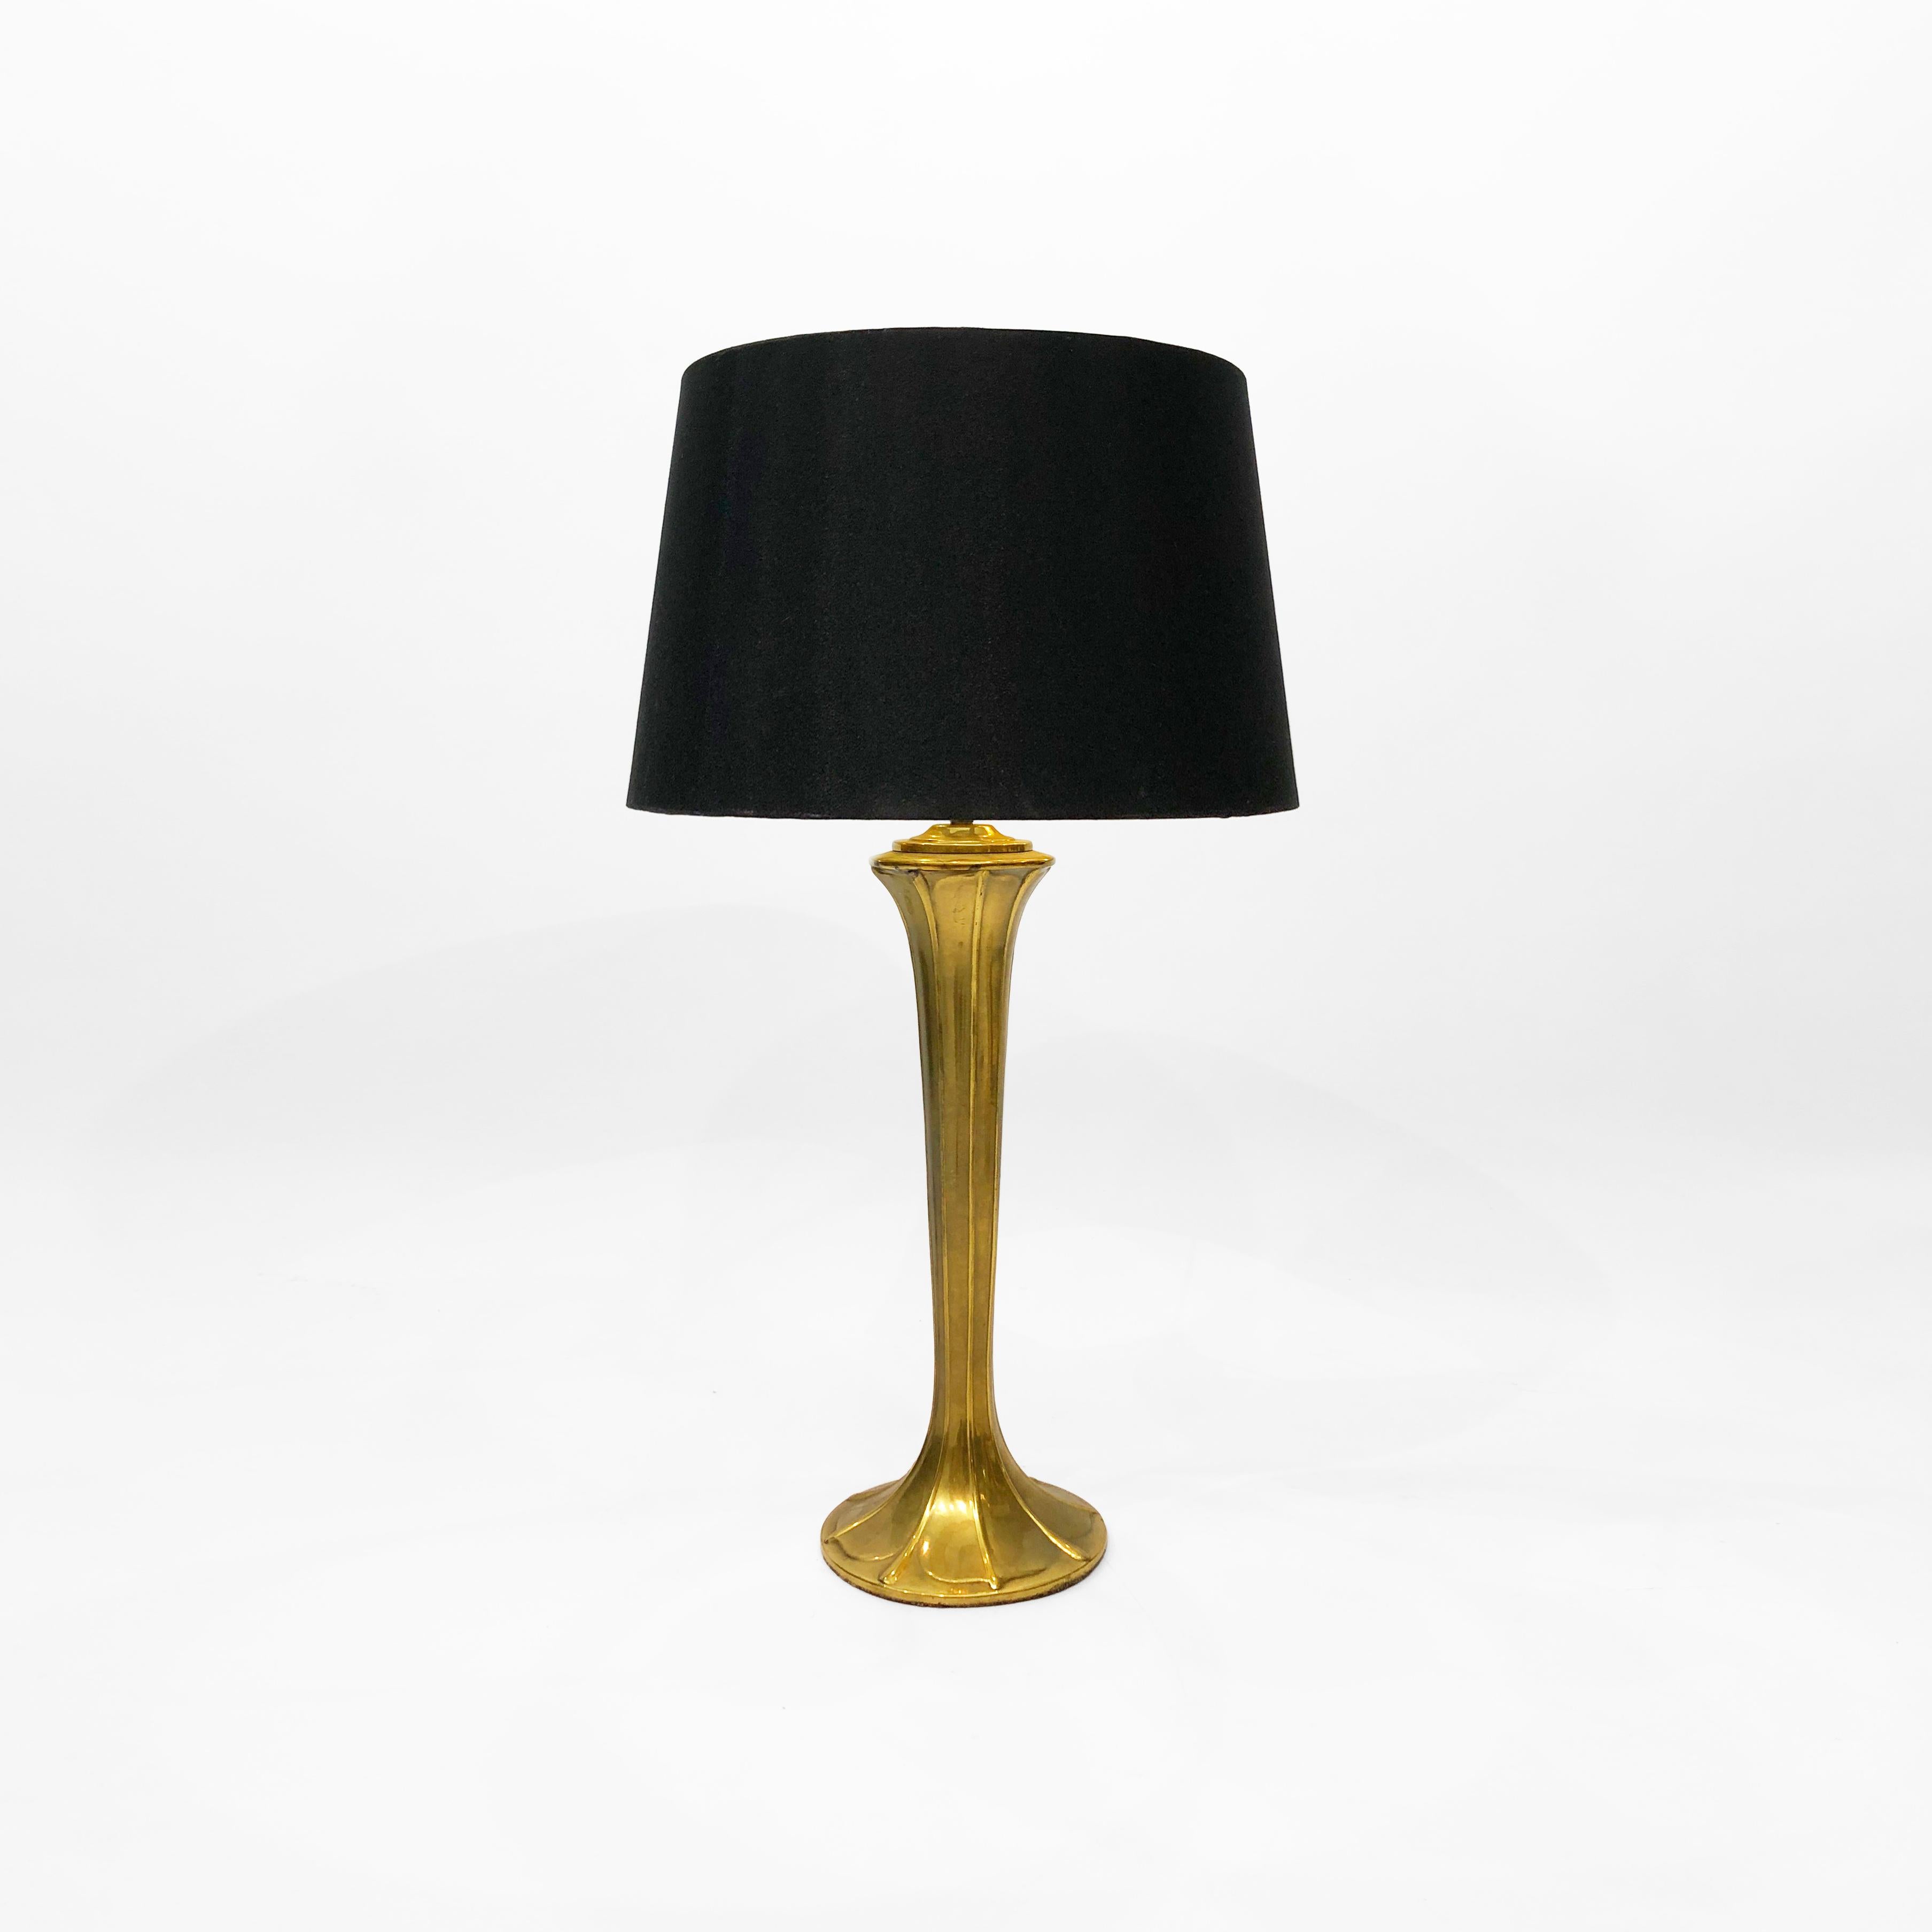 An Art Nouveau-inspired table lamp from the 1970s, composed entirely of brass. The organic, torchesque lamp gently curves inwards from the bottom, in an embossed leaf-like manner, before widening again where the bulb fitting is. The simple,